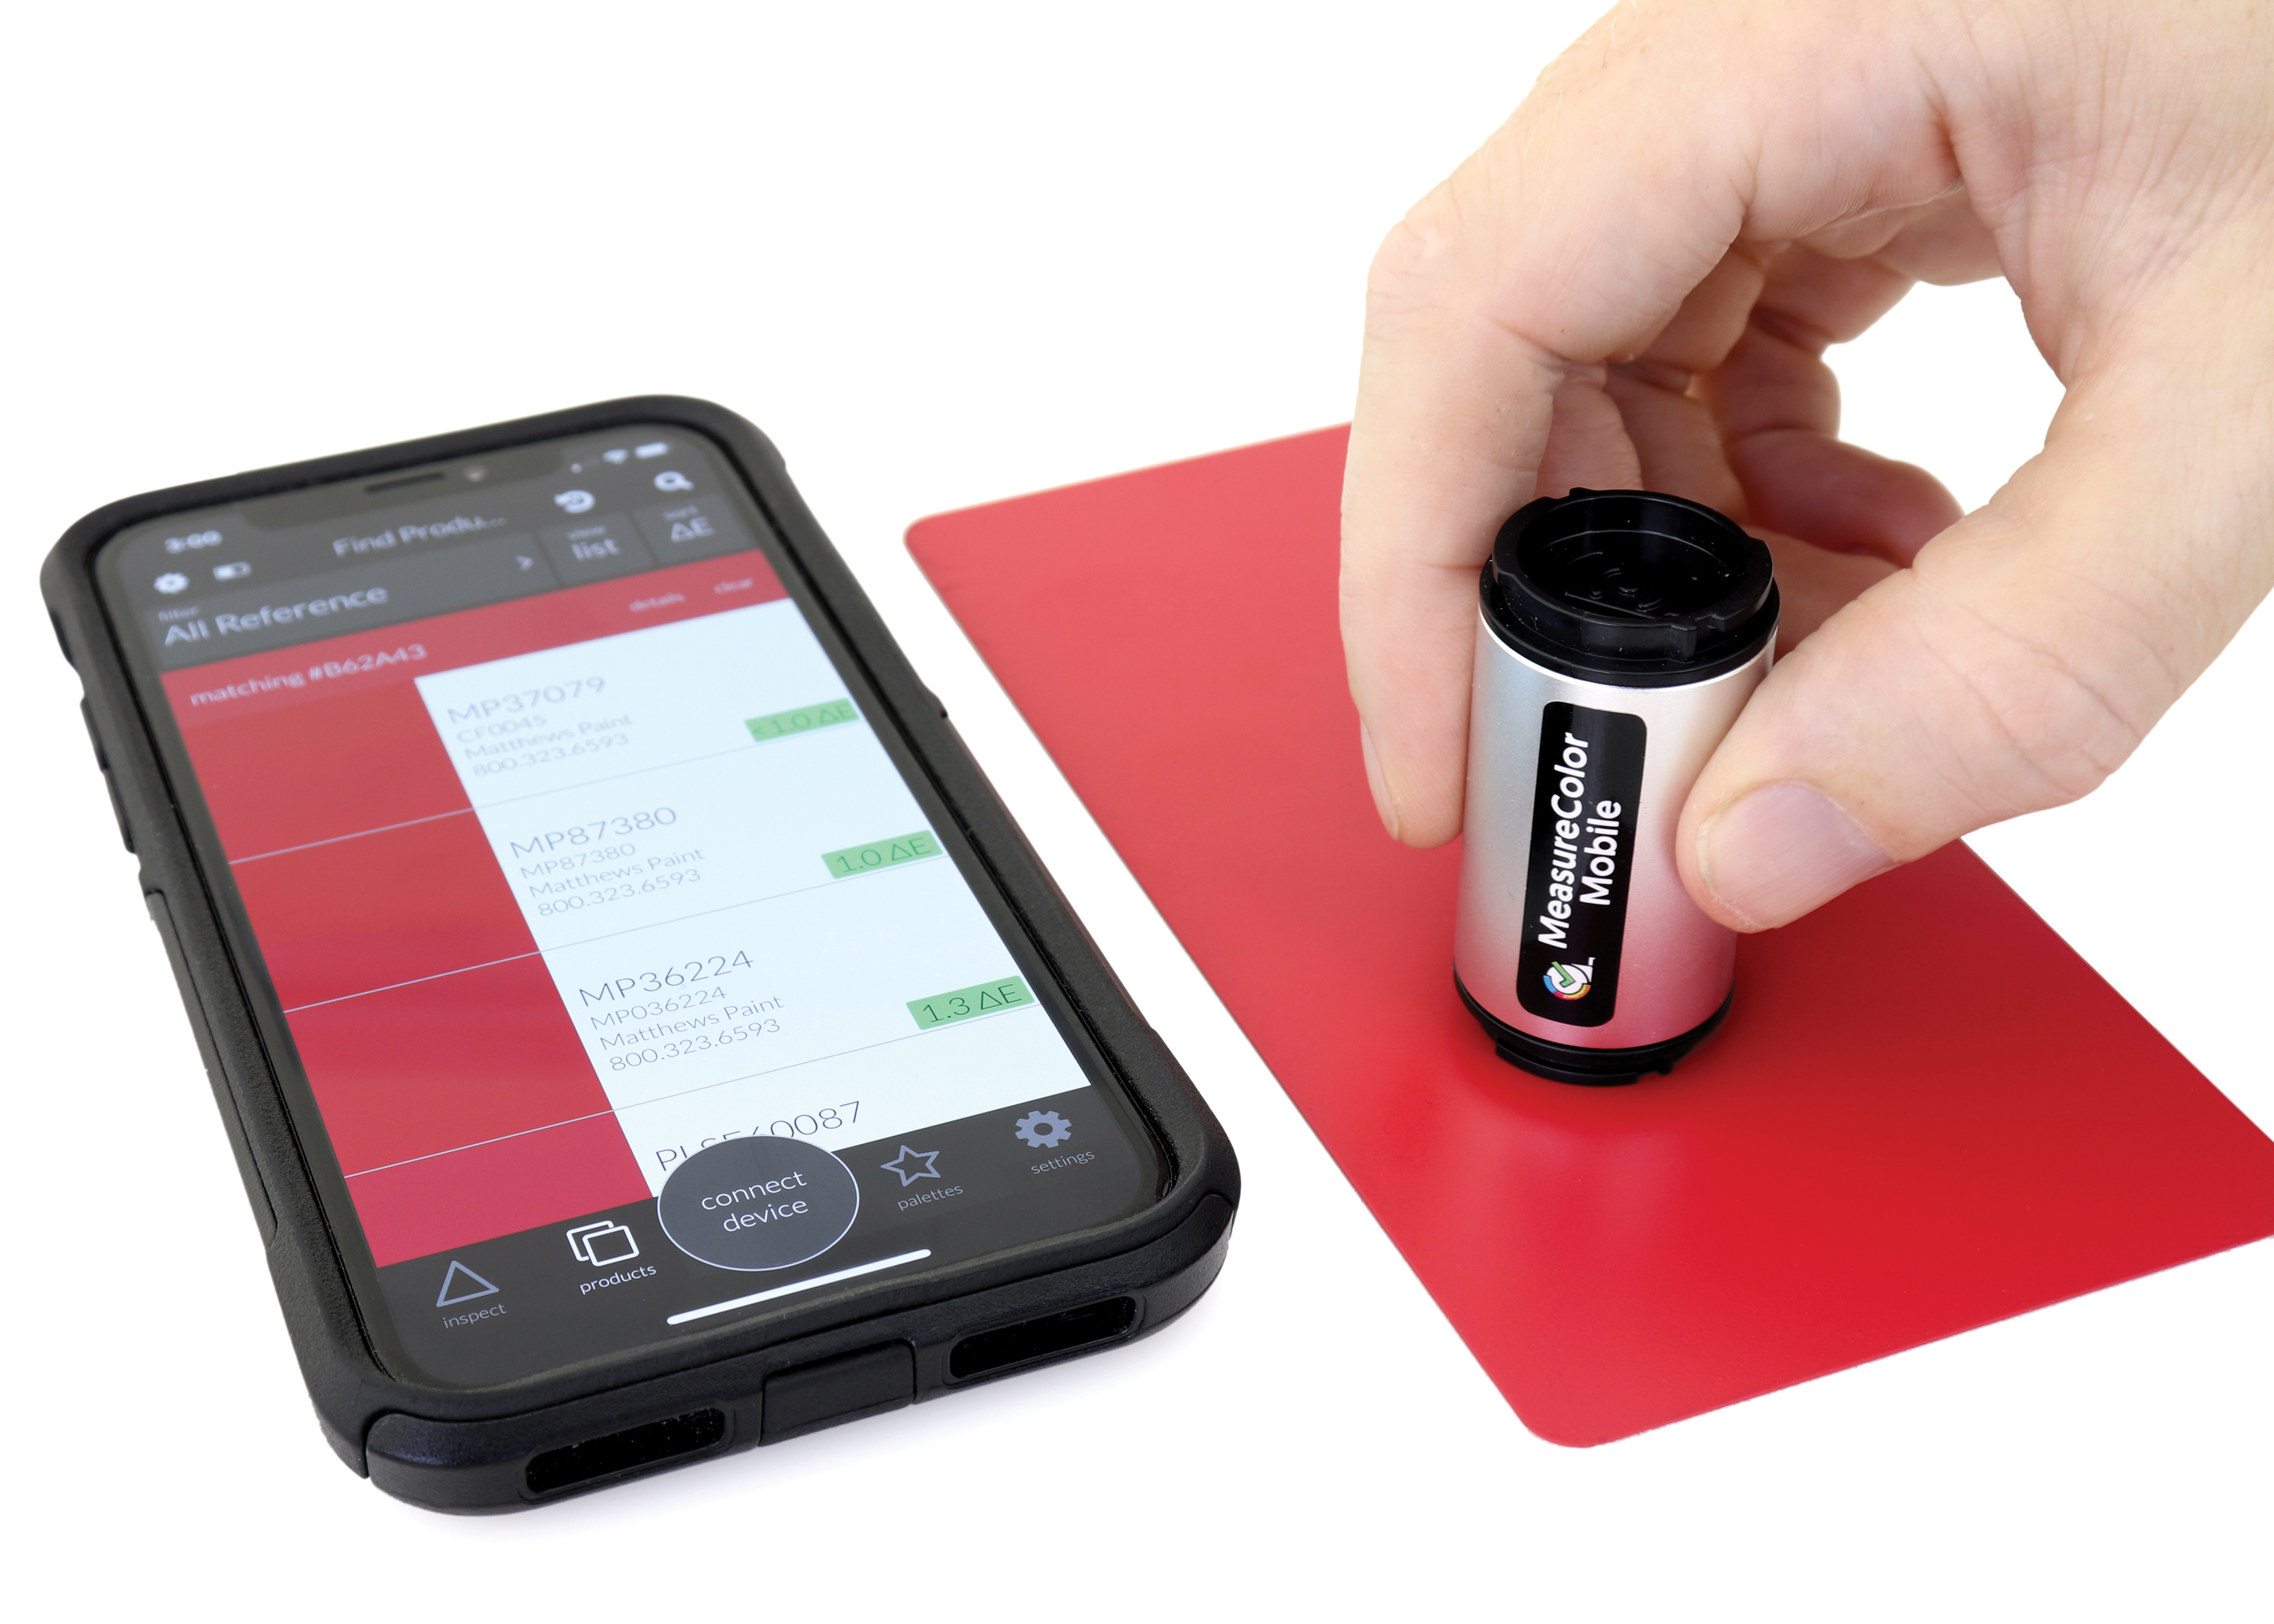 Scanning a sample to match a Matthews Paint color formula with the MeasureColor Mobile device and app